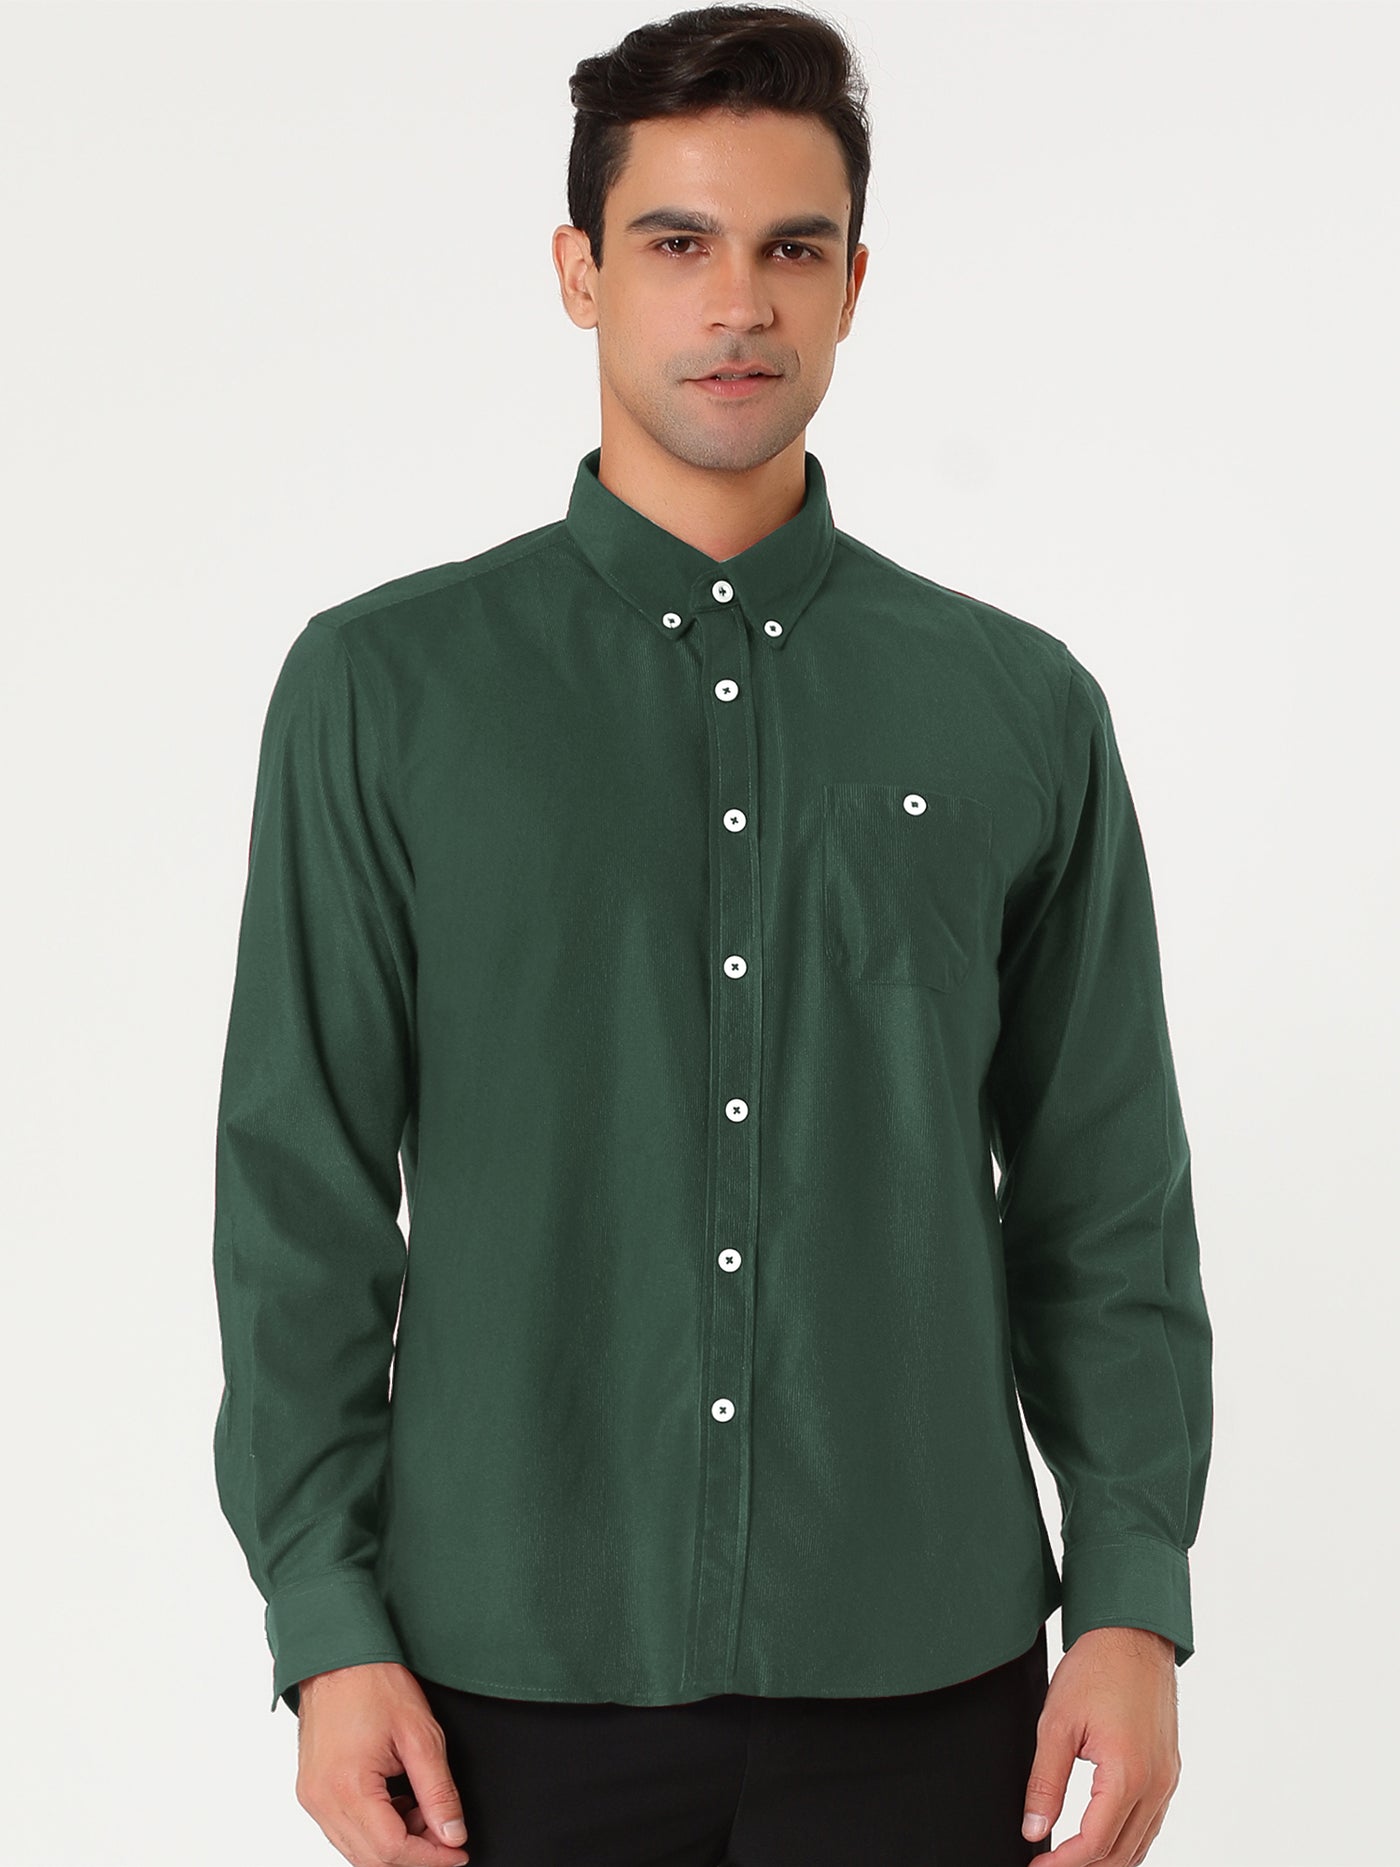 Bublédon Long Sleeve Solid Color Point Collar Corduroy Shirts